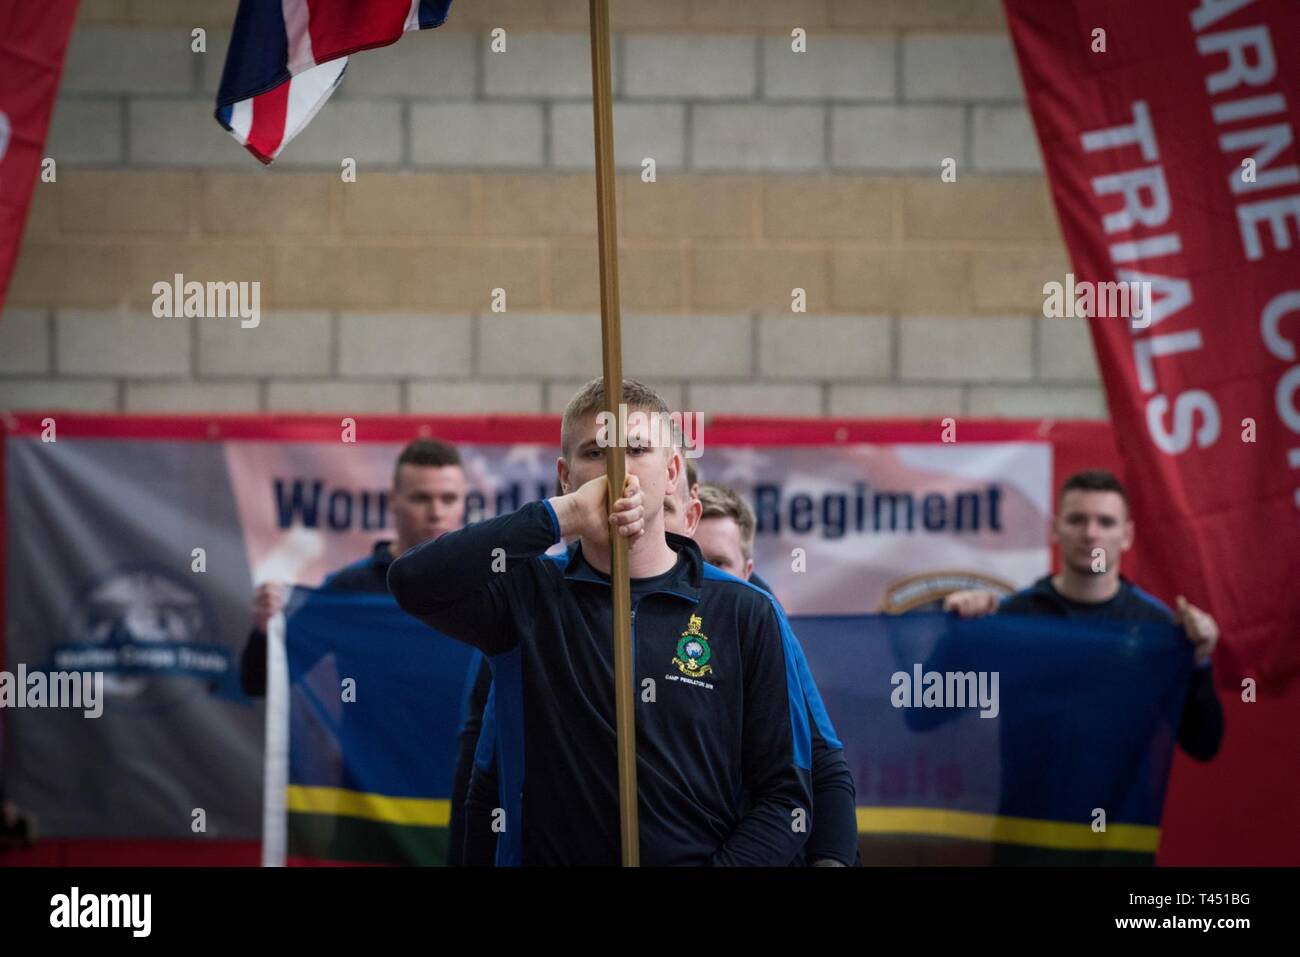 MARINE CORPS BASE CAMP PENDLETON, CALIFORNIA – Members of the United Kingdom march in during the 9th annual Marine Corps Trials opening ceremony at Marine Corps Base Camp Pendleton, California, Feb. 26, 2019. The Marine Corps Trials promotes recovery and rehabilitation through adaptive sport participation and develops camaraderie among recovering service members (RSMs) and veterans. Additionally, the Trials serve as an opportunity for RSMs to demonstrate physical and mental achievements and as the primary venue to select Marine Corps participants for the DoD Warrior Games. (Official U.S. Marin Stock Photo